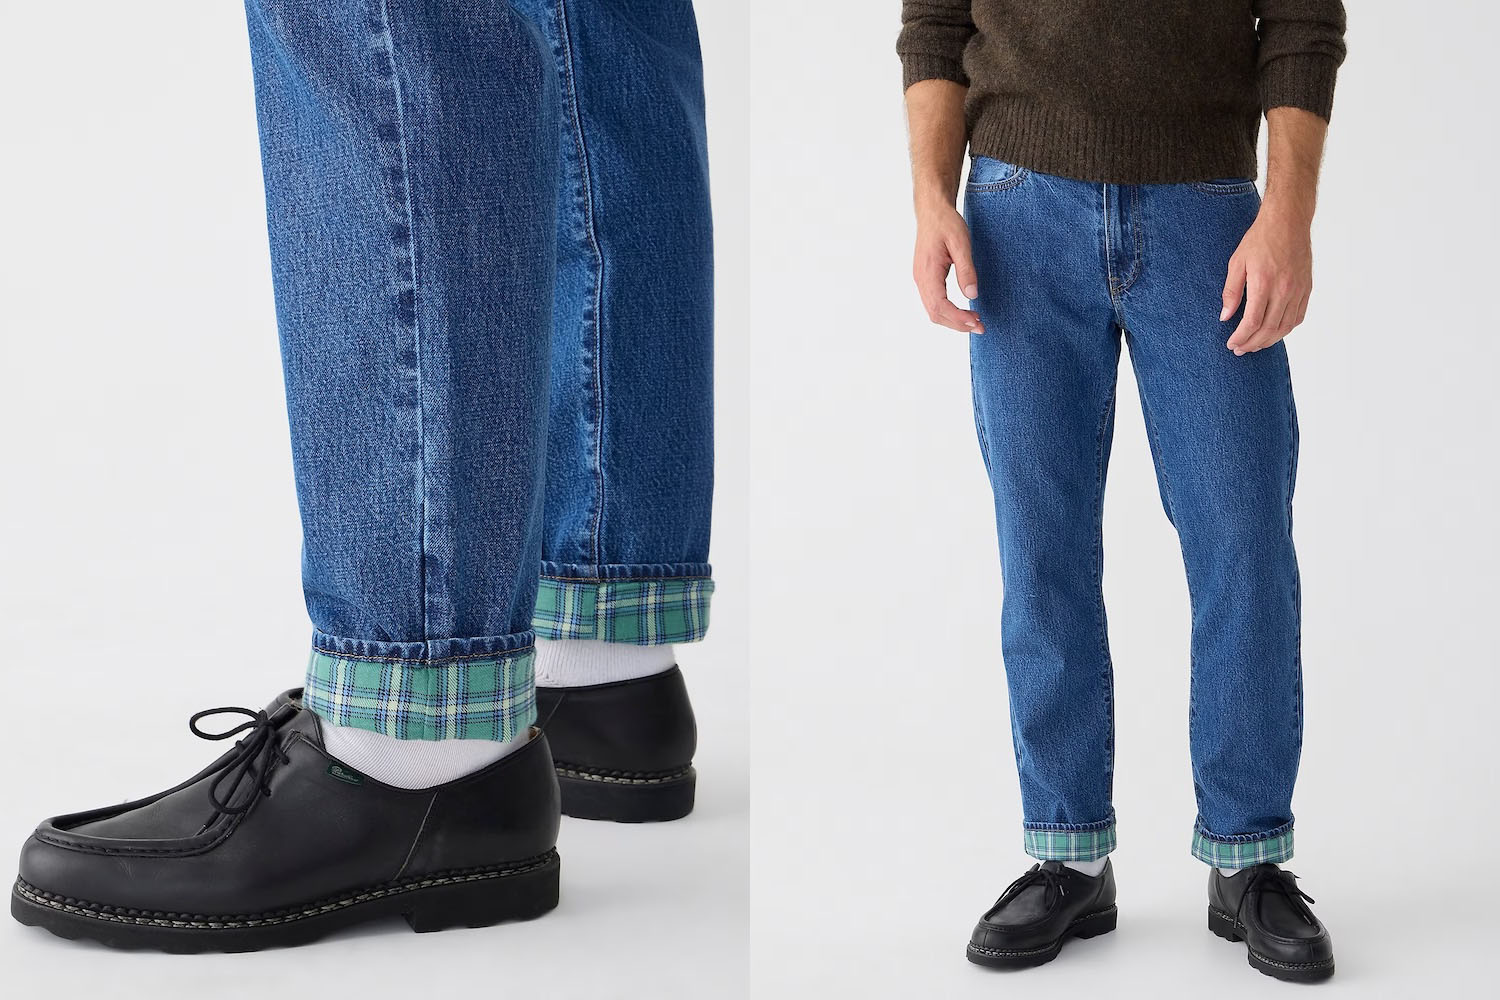 The 10 Best Flannel-Lined Jeans for Cool Weather